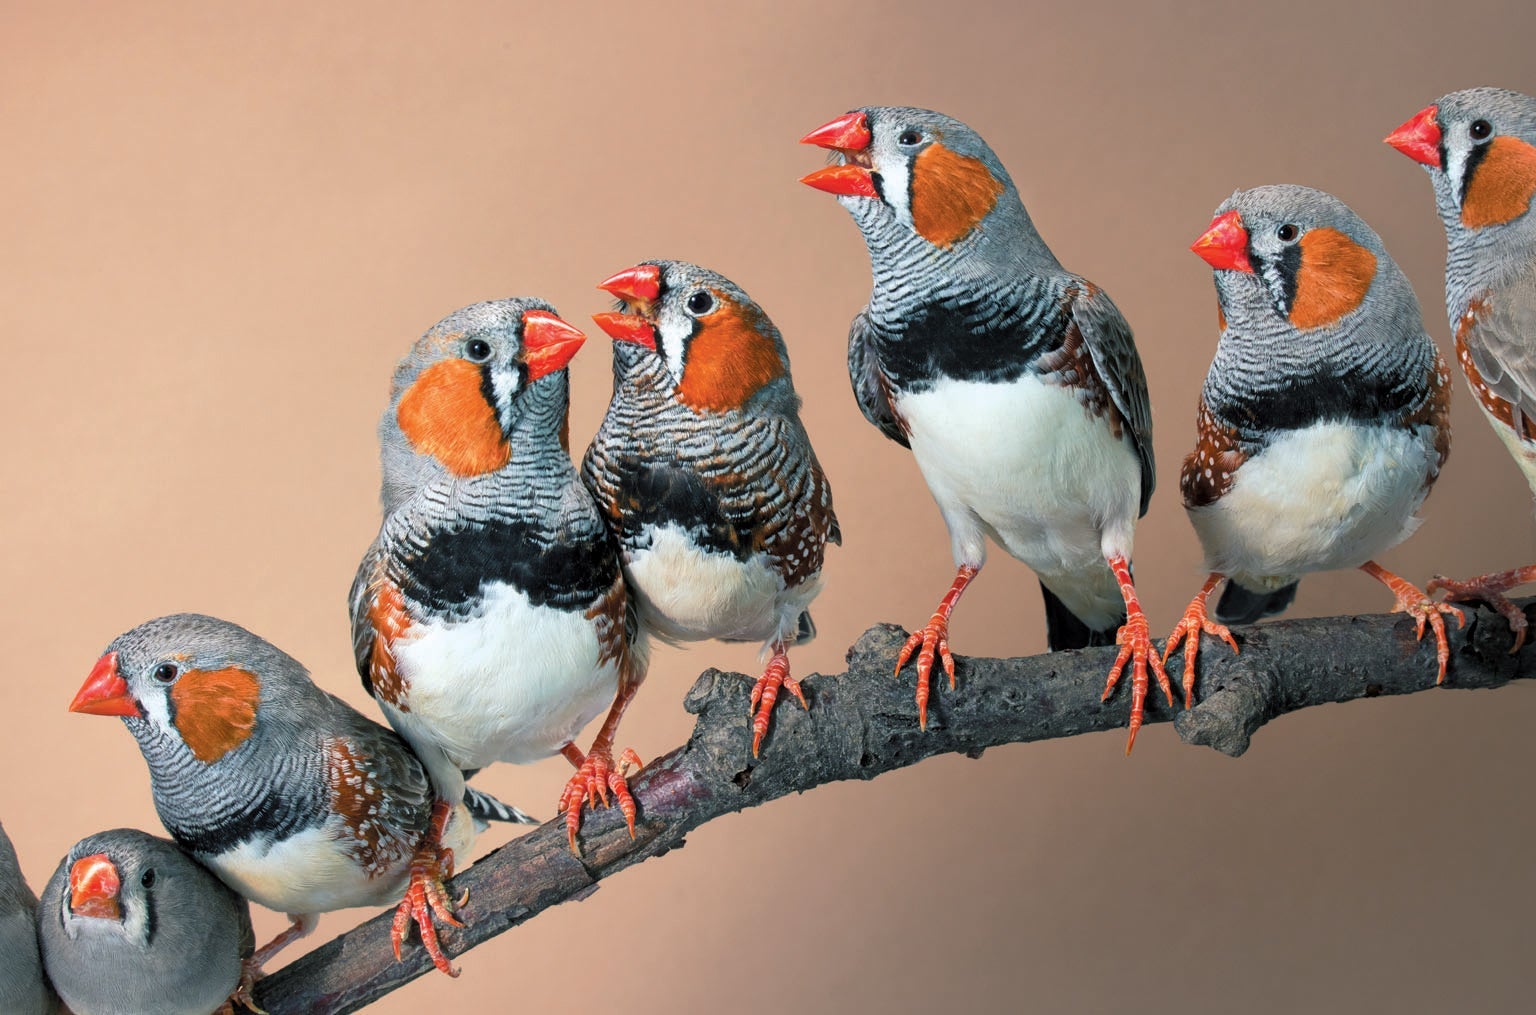 Independently Imminent Decline What Birds Really Listen for in Birdsong (It's Not What You Think) -  Scientific American